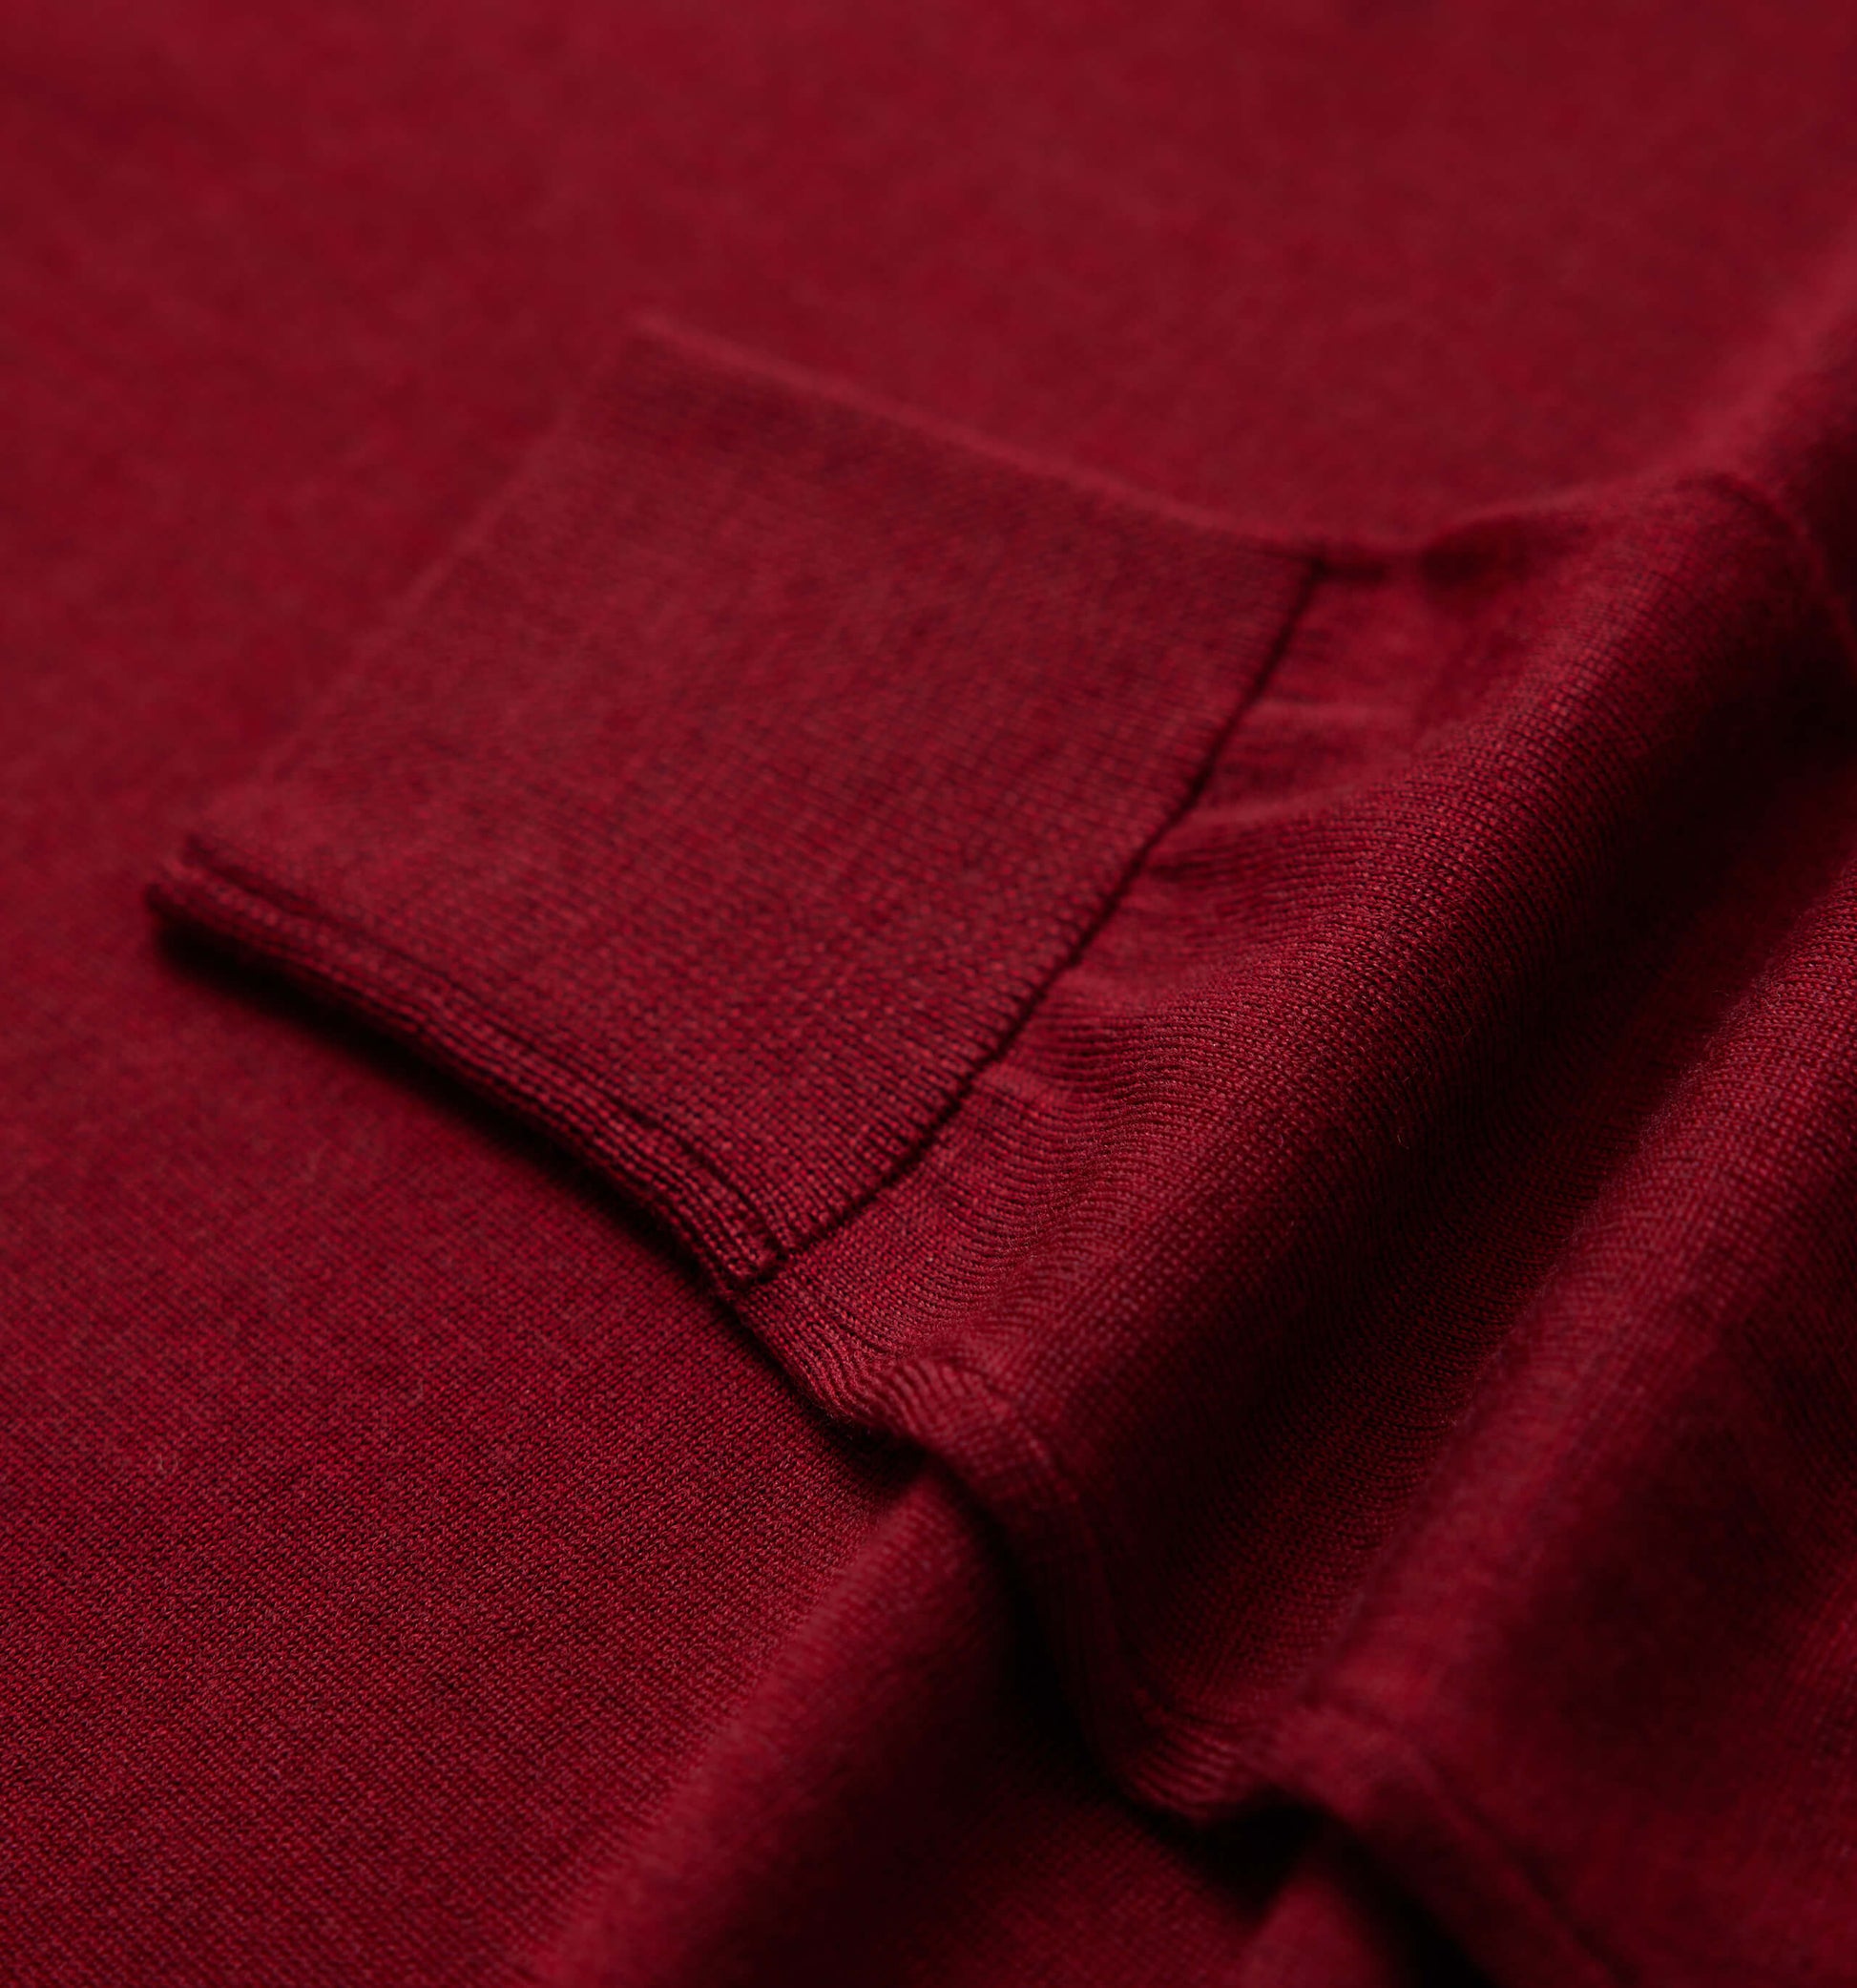 The John - Merino Wool Crewneck In Red From King Essentials